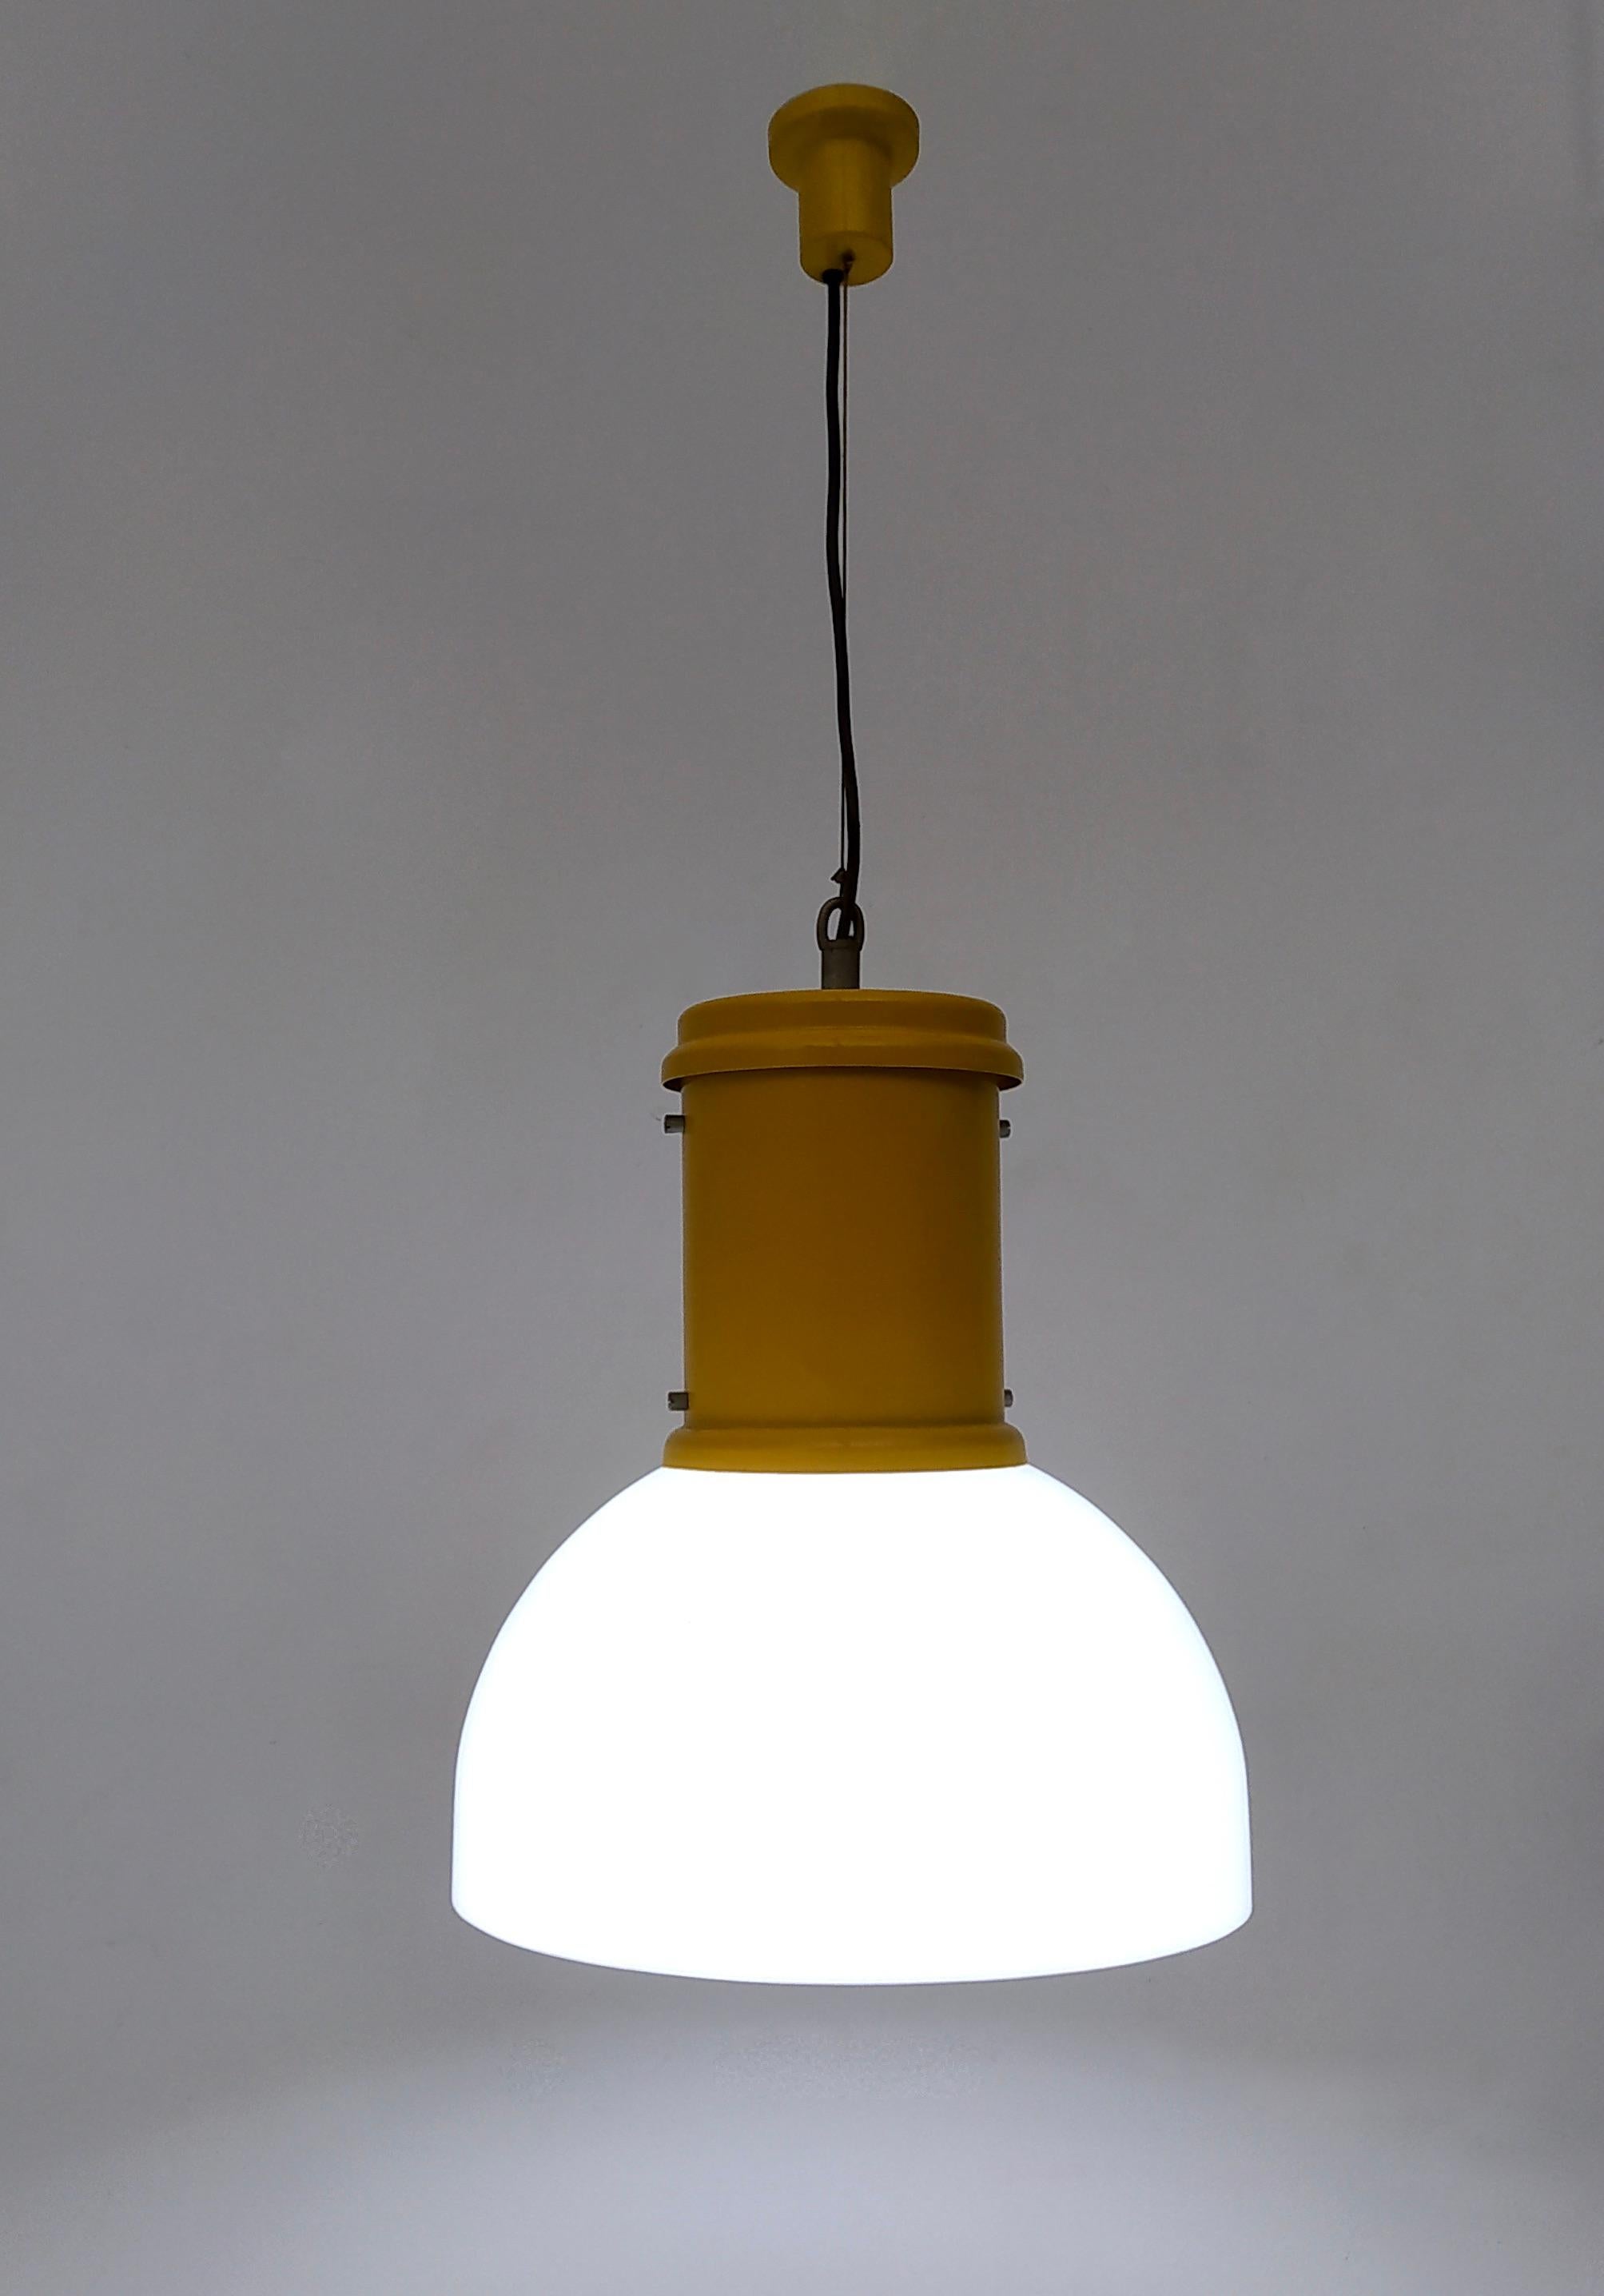 Made in Italy, 1970s.
It is made in white plexiglass, yellow varnished aluminum and a steel wire.
This pendant is a vintage piece, therefore it might show slight traces of use, but it can be considered as in excellent original condition and ready to